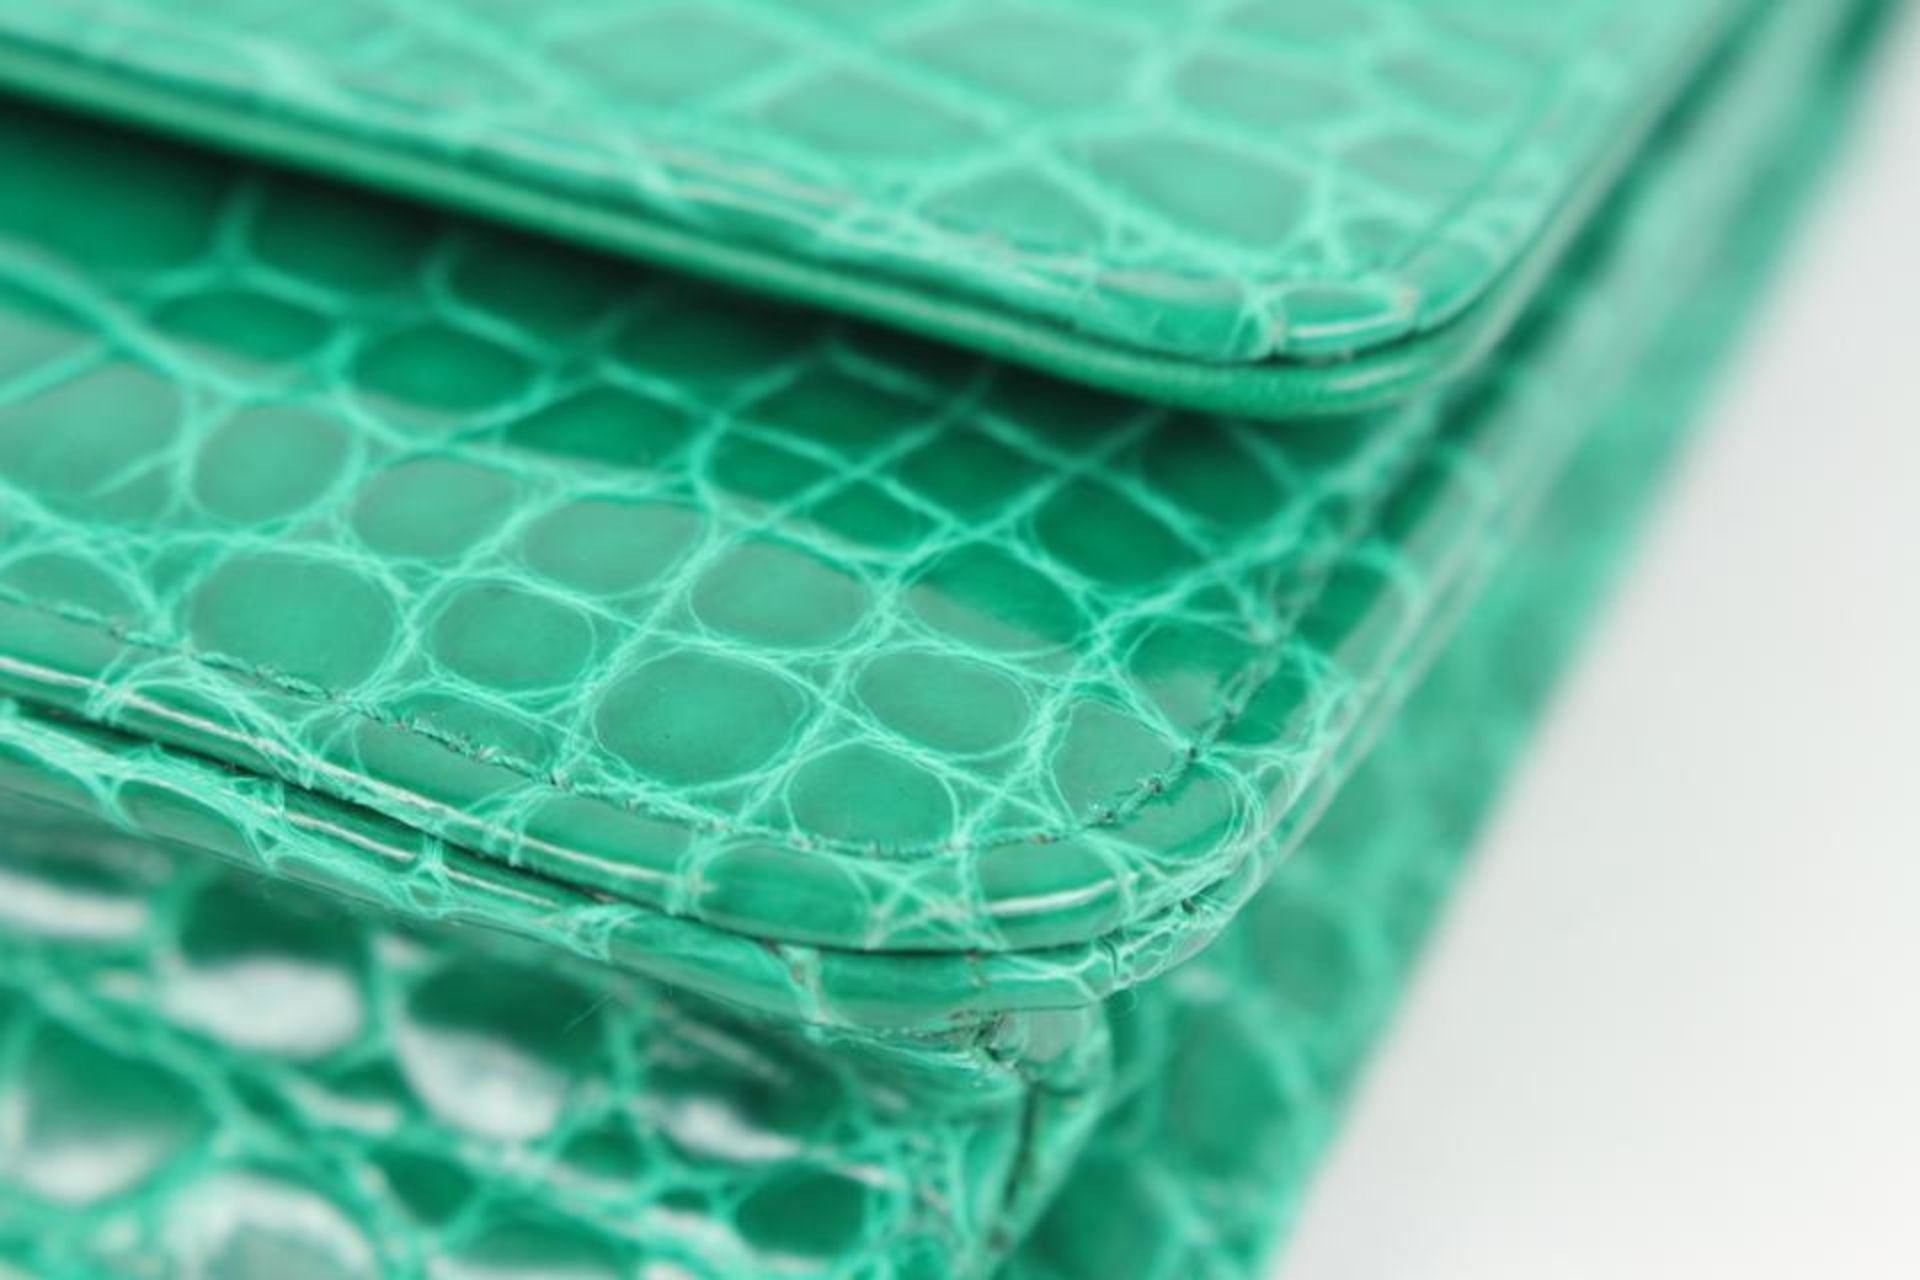 CHANEL ULTRA RARE EMERALD GREEN ALLIGATOR WALLET ON CHAIN SHW WOC - Image 3 of 11